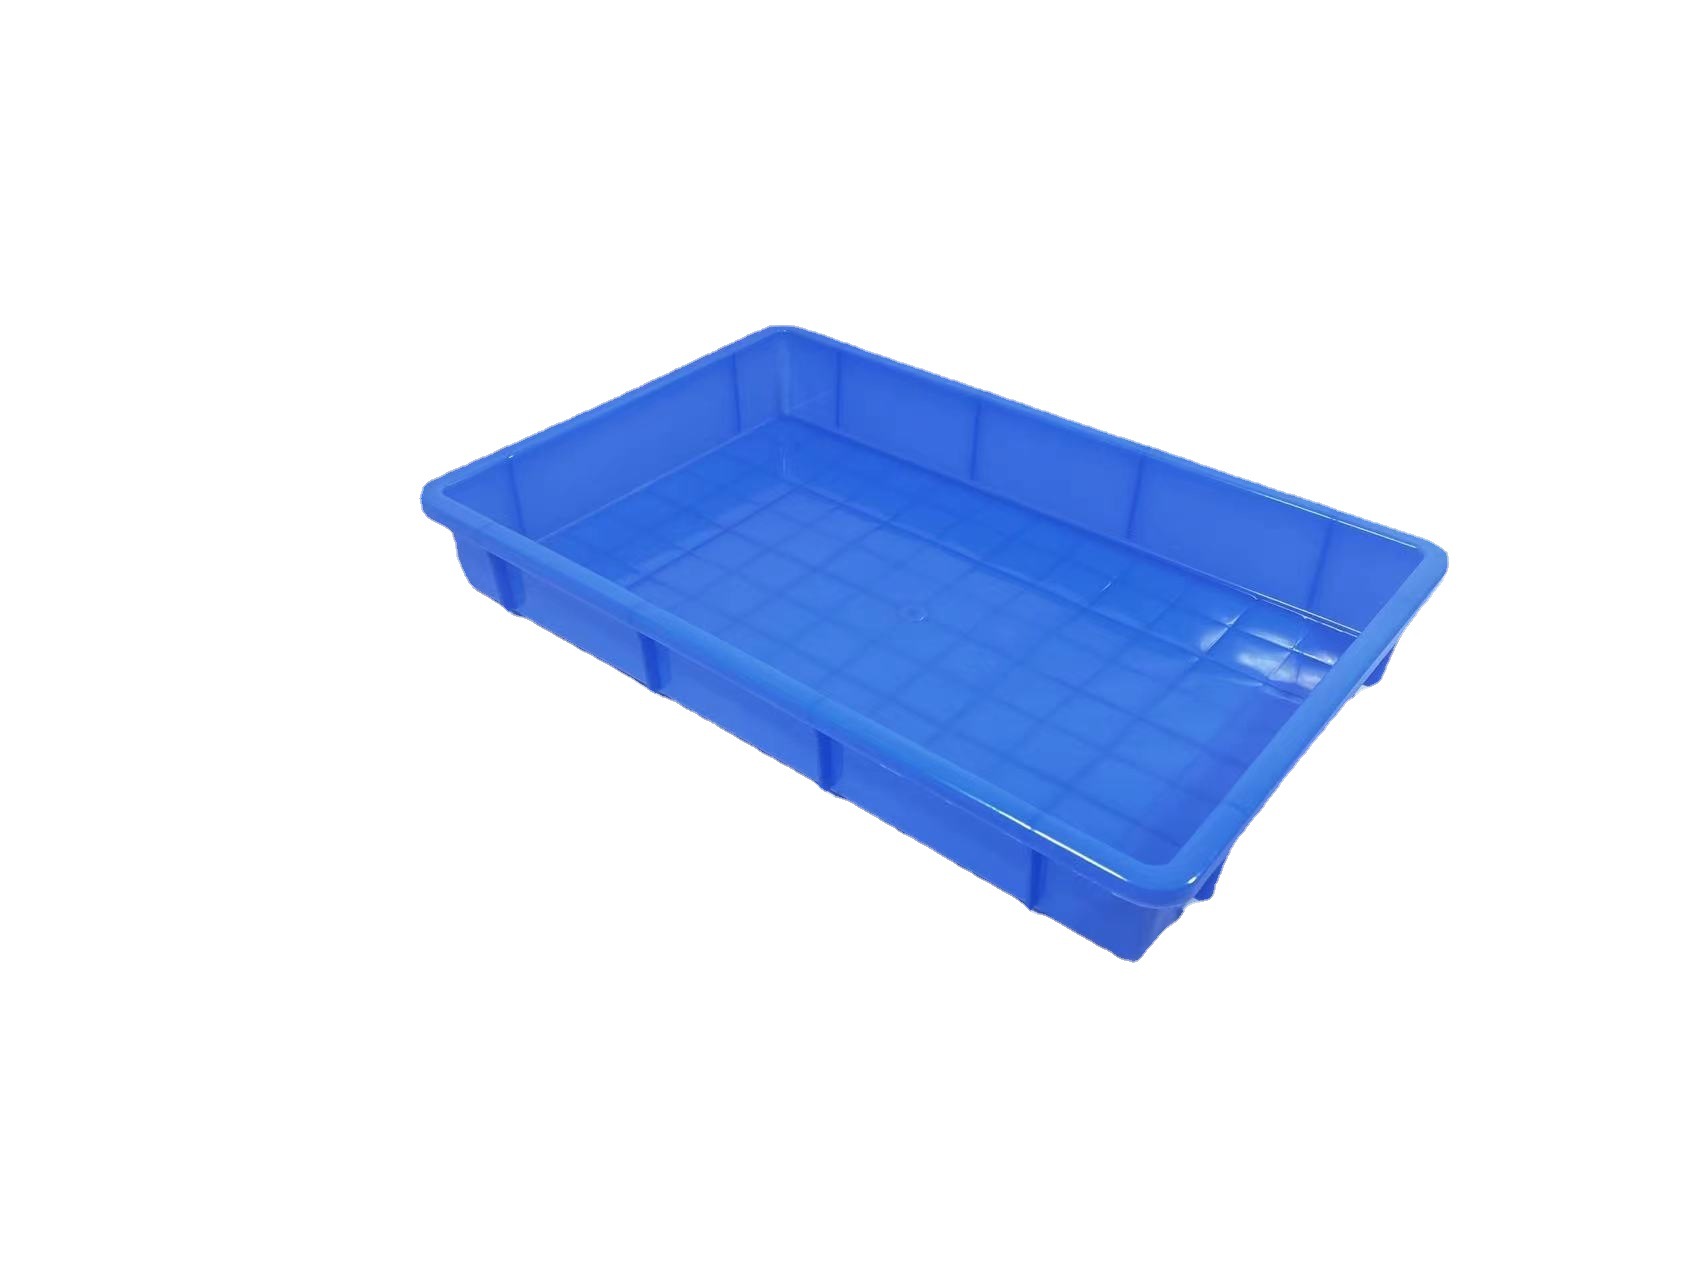 Plastic Rectangular Square Plate Thickened Shallow Mouth Storage Shelf Material Box Plastic Plate Hardware Tools Non-Airtight Crate